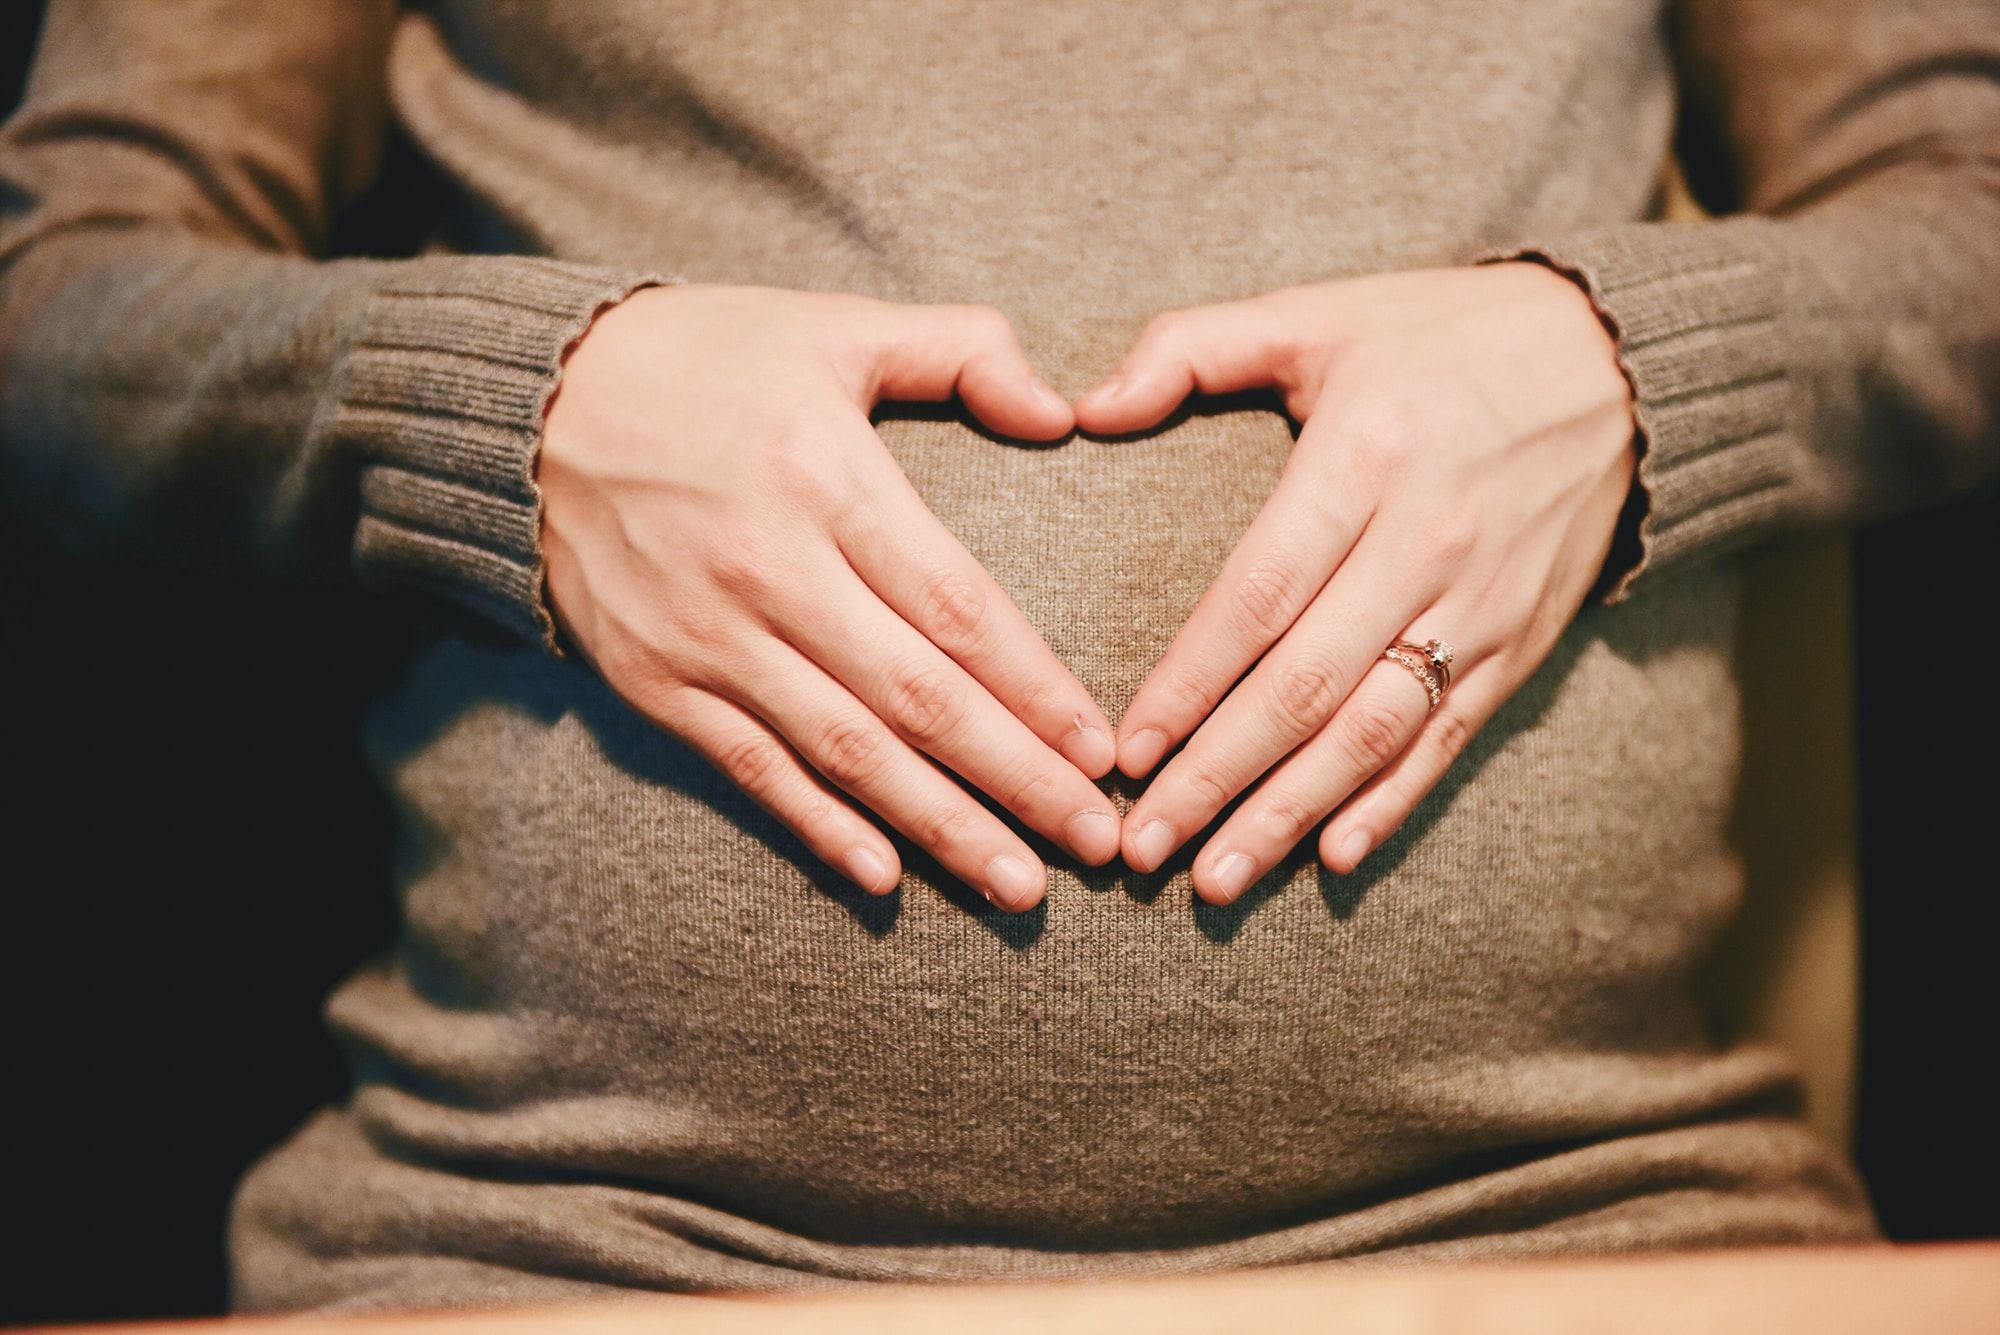 Image of a hands forming a heart shape over a pregnant belly